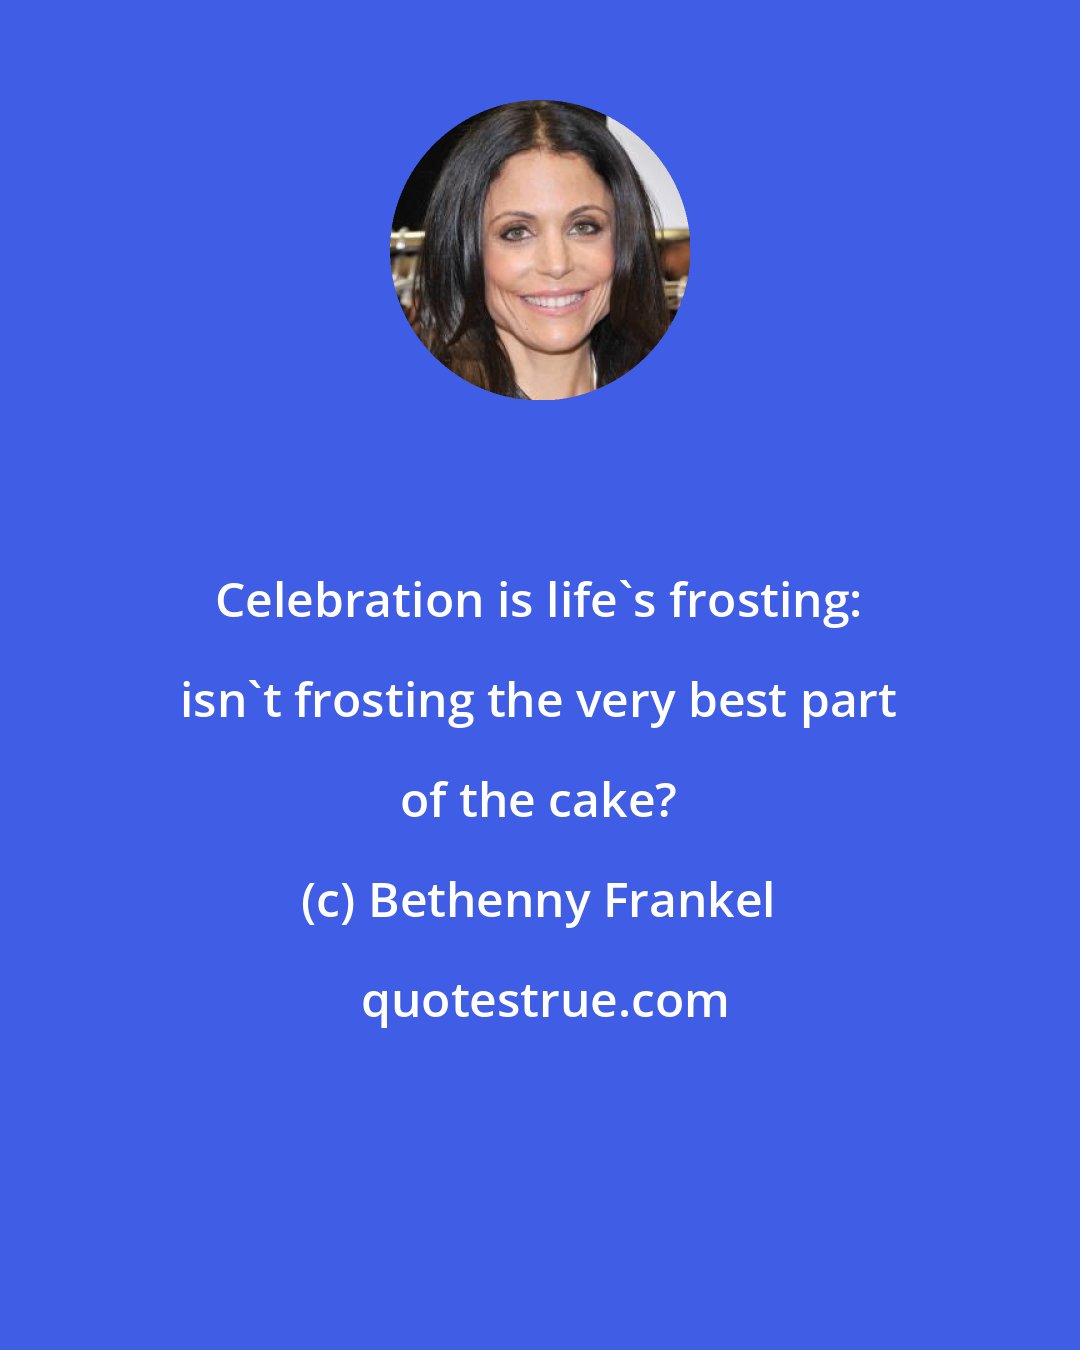 Bethenny Frankel: Celebration is life's frosting: isn't frosting the very best part of the cake?